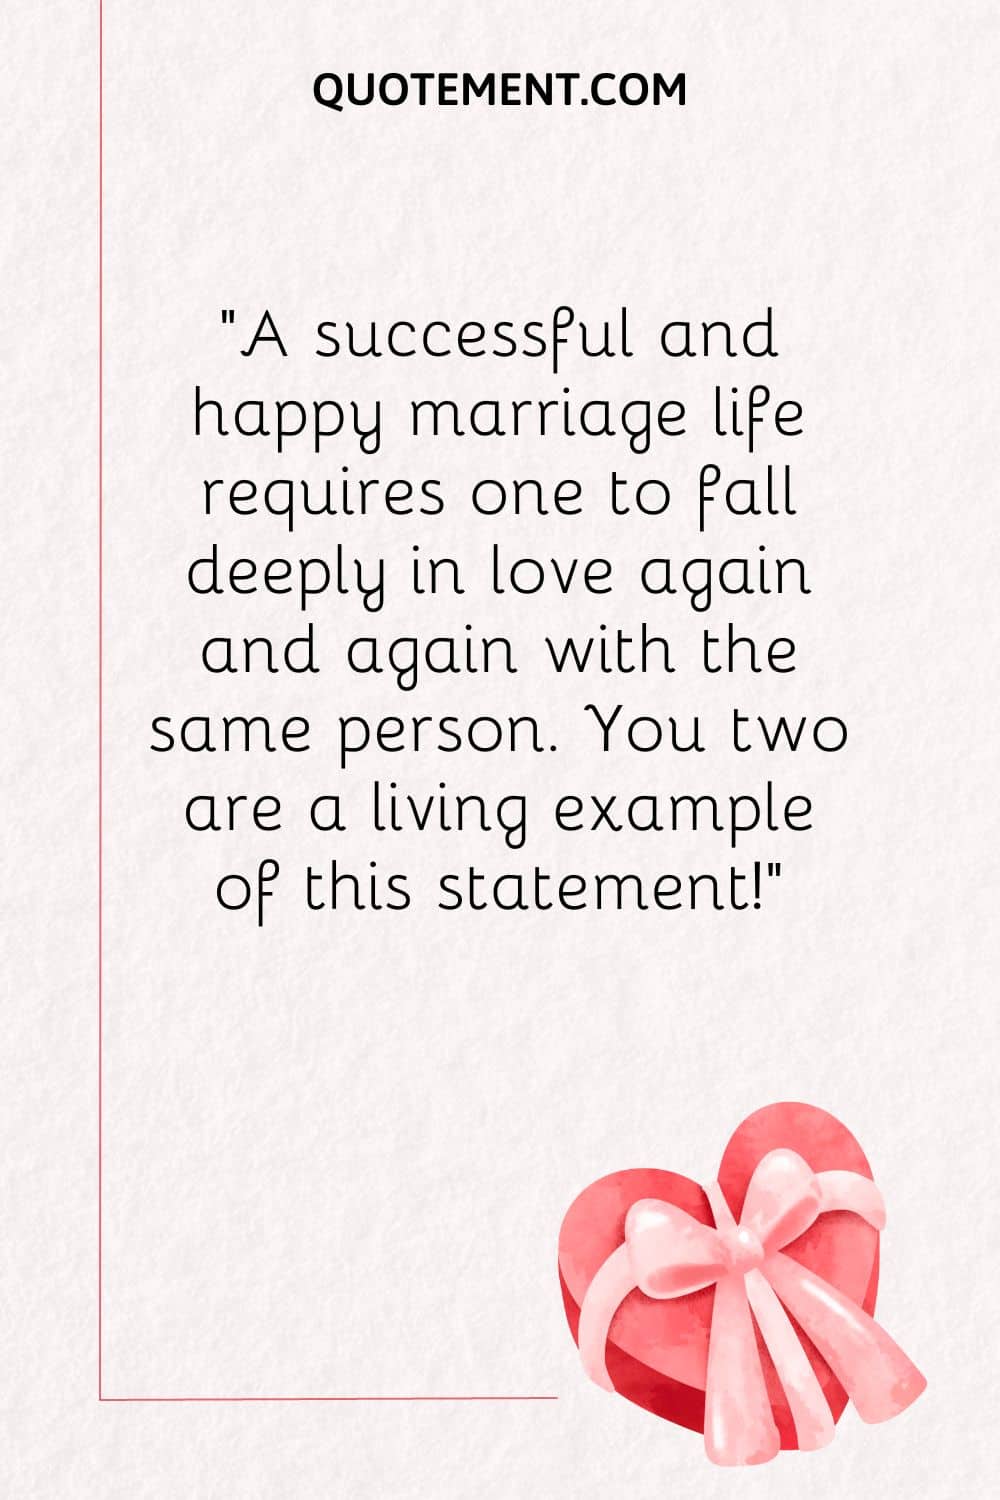 A successful and happy marriage life requires one to fall deeply in love again and again